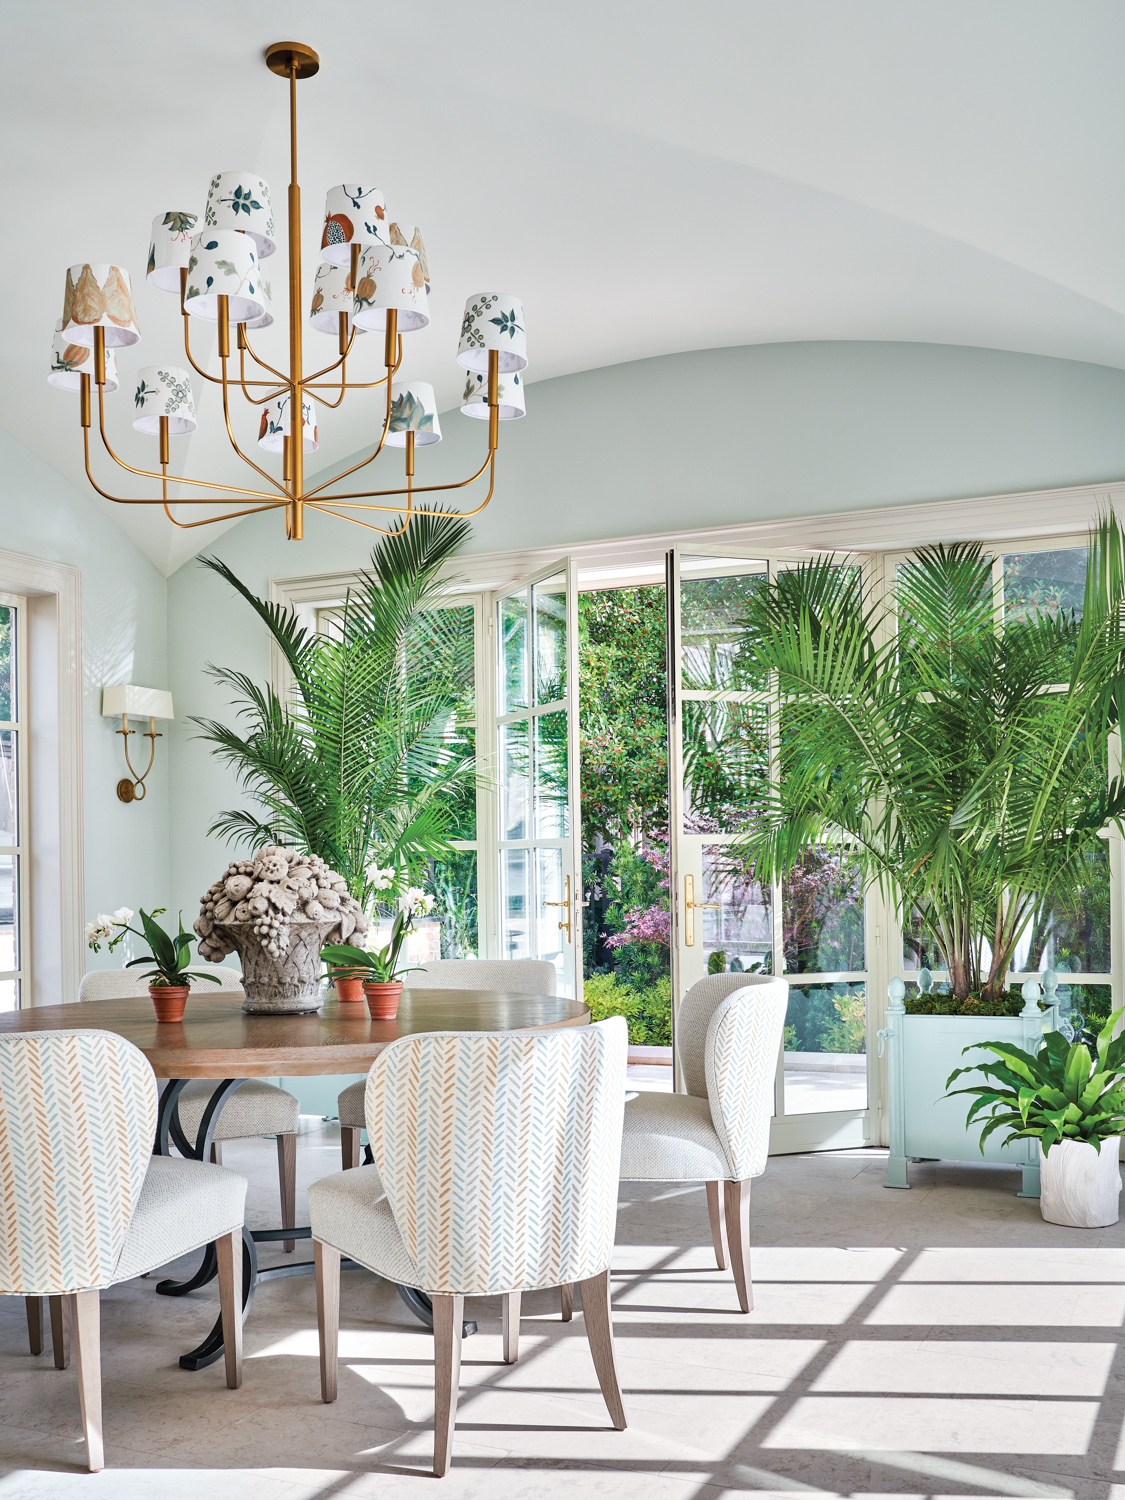 sun room with a dining table and chairs and views of lush landscaping